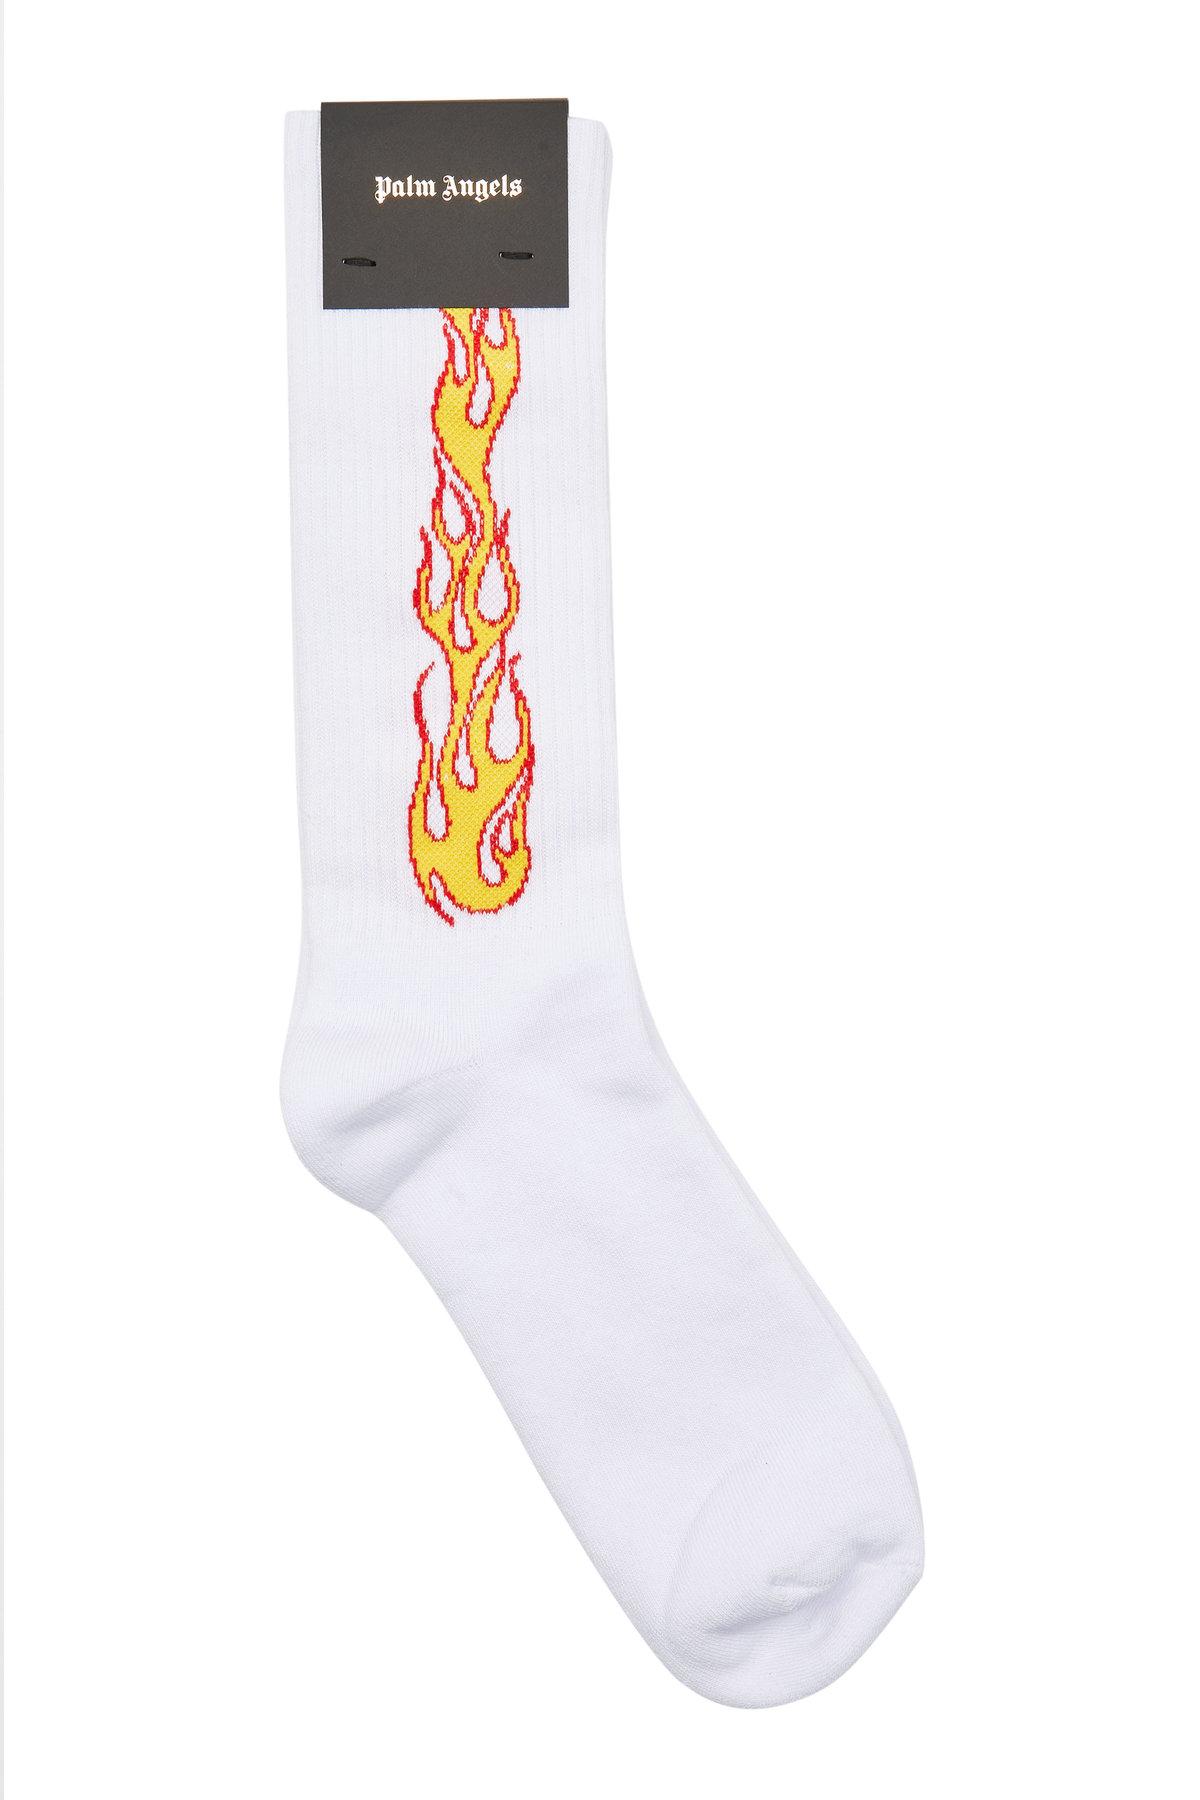 Palm Angels Flames Cotton Socks in White - Lyst